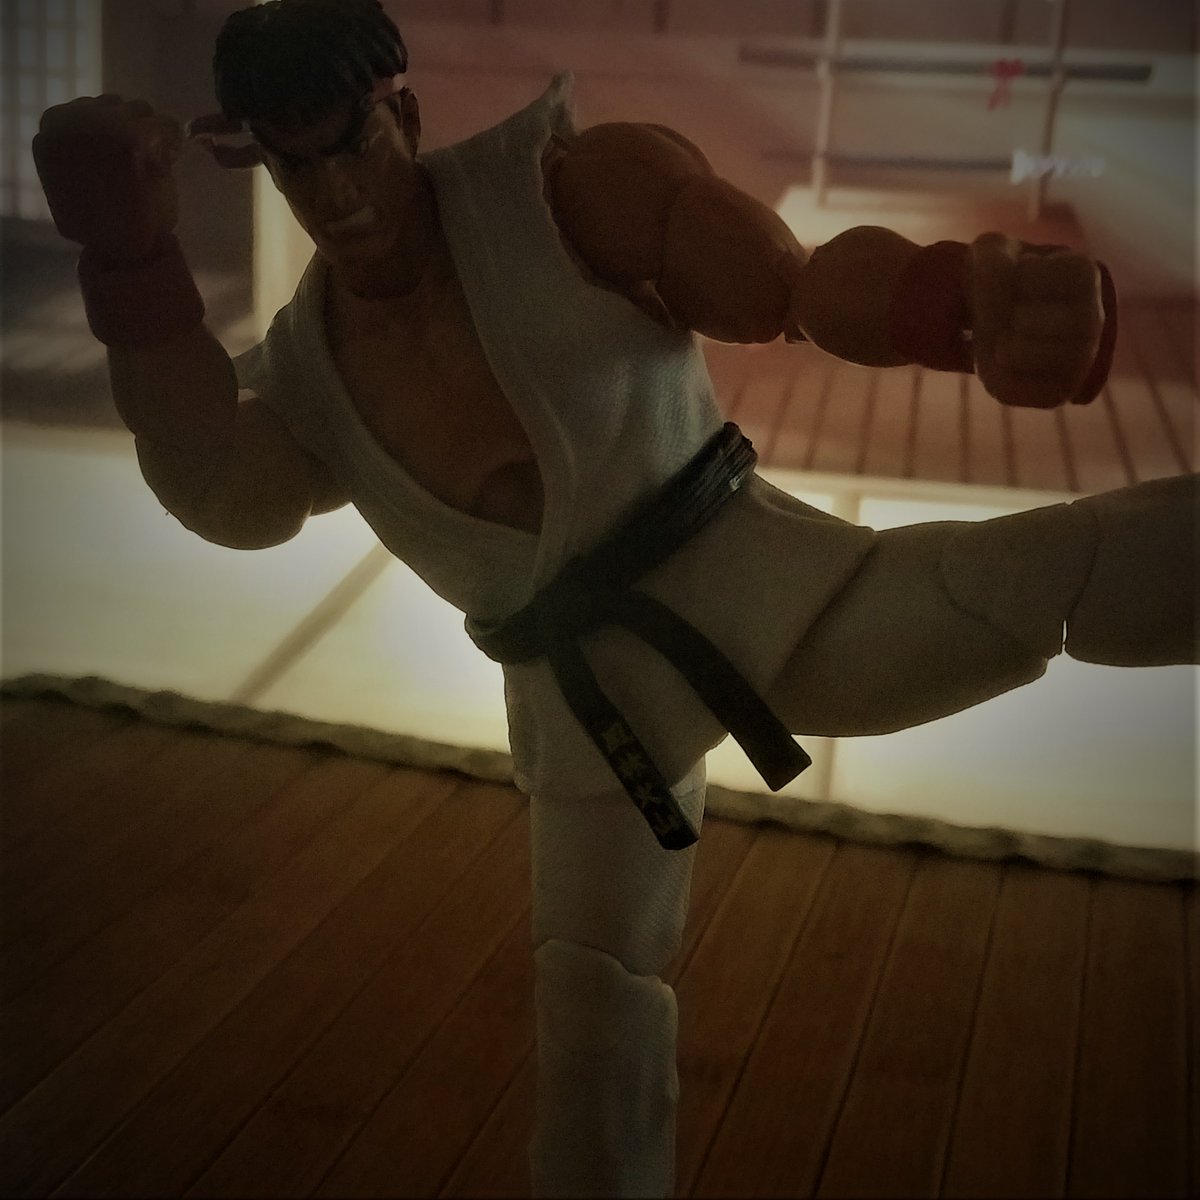 #StreetFighter #ryu #toy #toys #toyphotography #toyphotofrenchforce #videogames 

#octoyber 
Day 13
#pixelpower